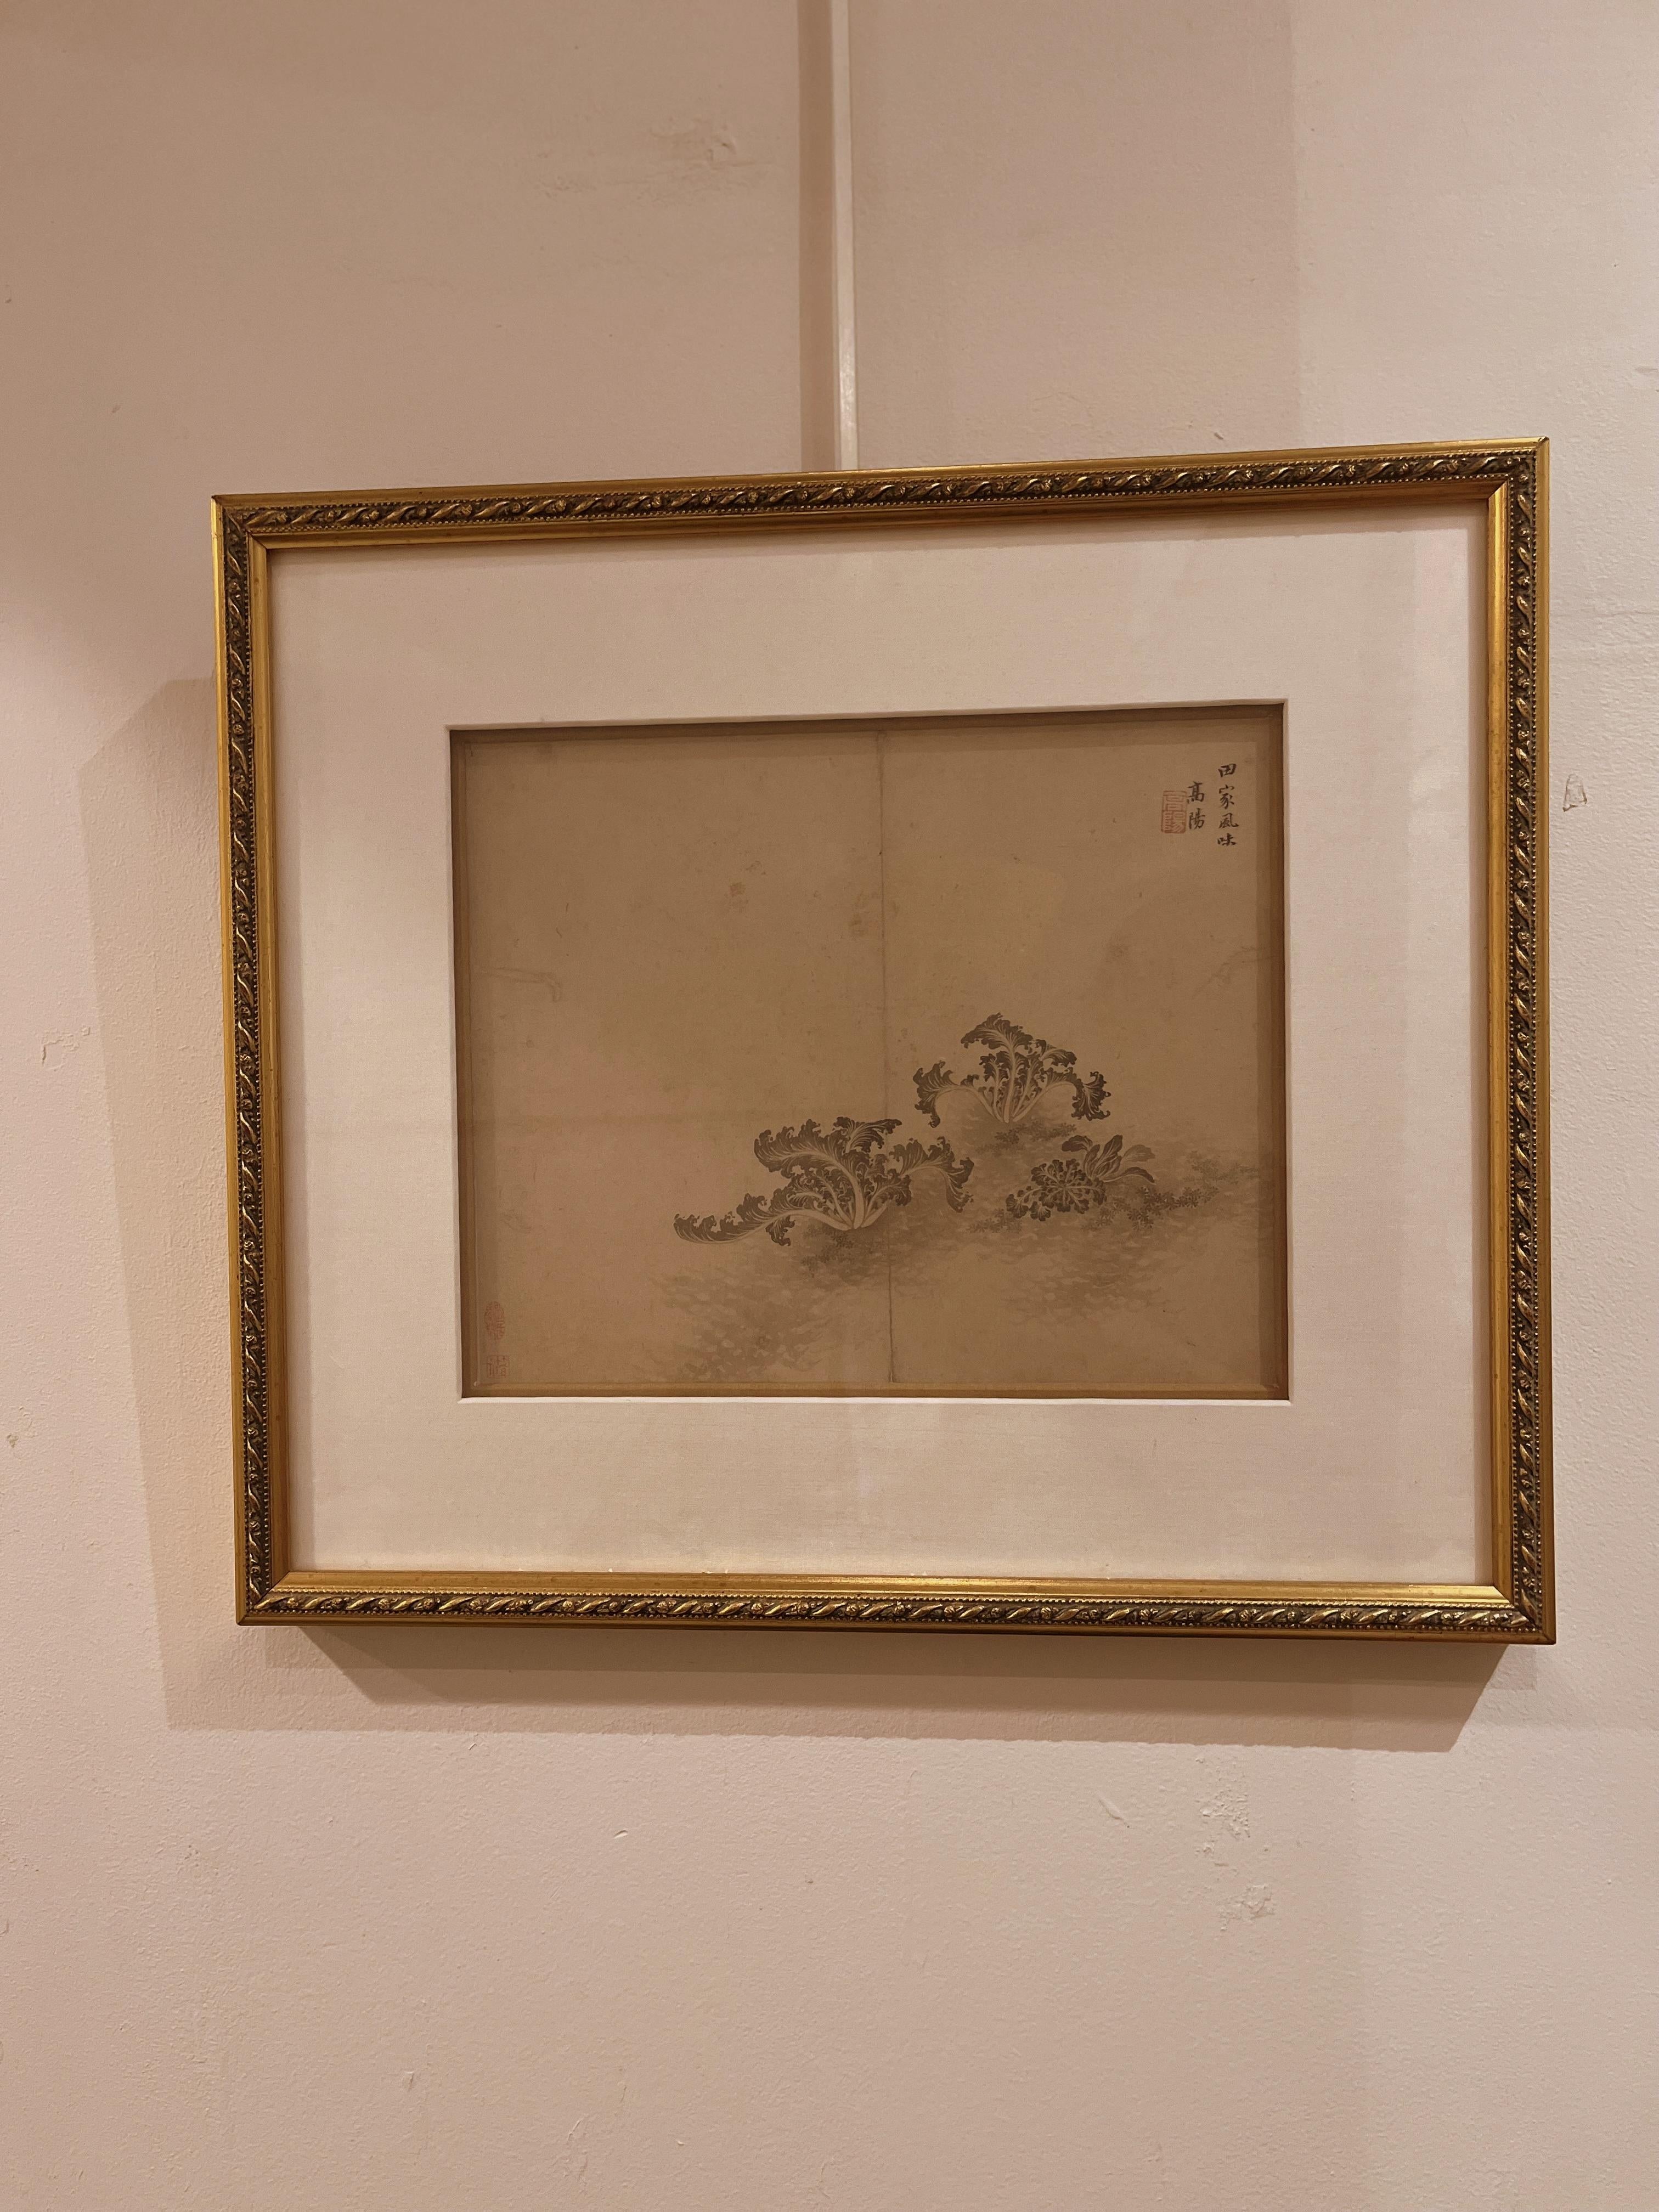 Refined Chinese brush painting of plants, ink on rice paper, 19th century, signed with seal.
Overall size:  17.6  width.  15.5